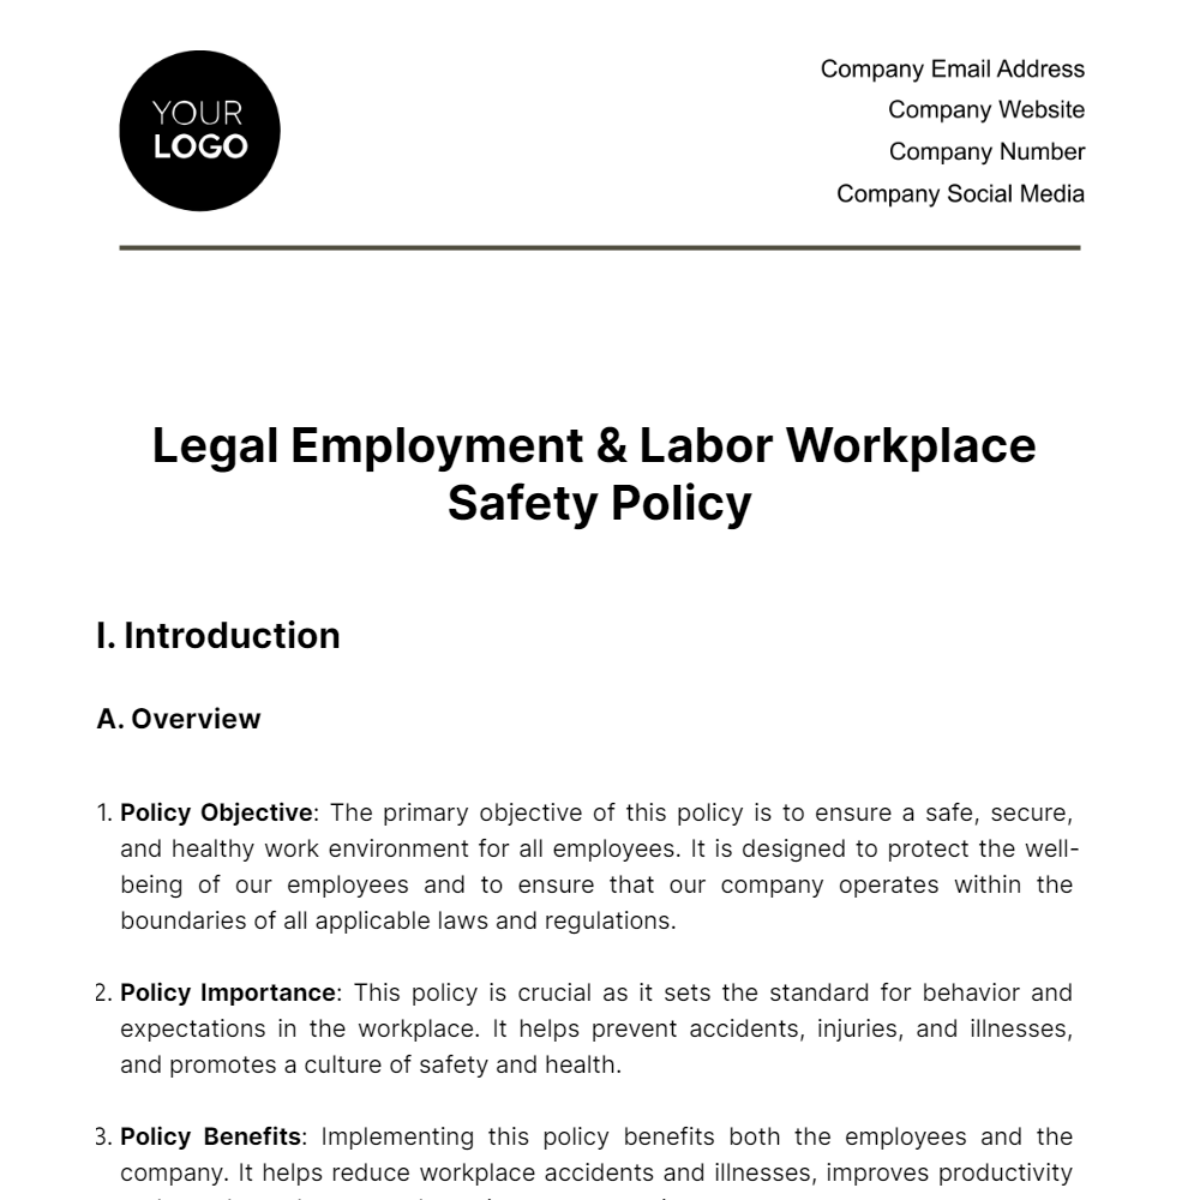 Free Legal Employment & Labor Workplace Safety Policy Template